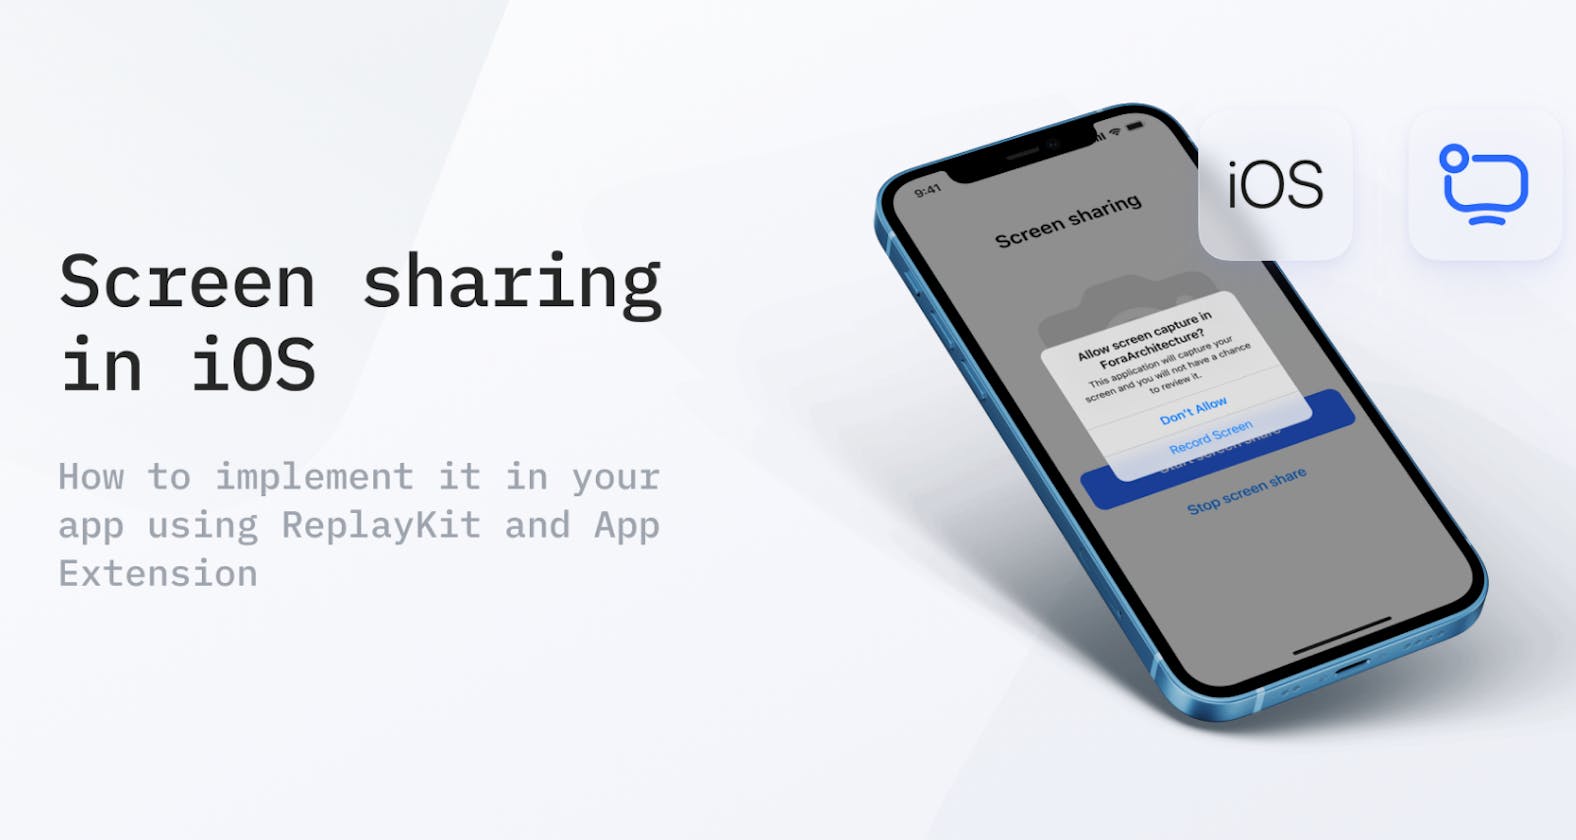 How to Implement Screen Sharing in iOS App Using ReplayKit and App Extension